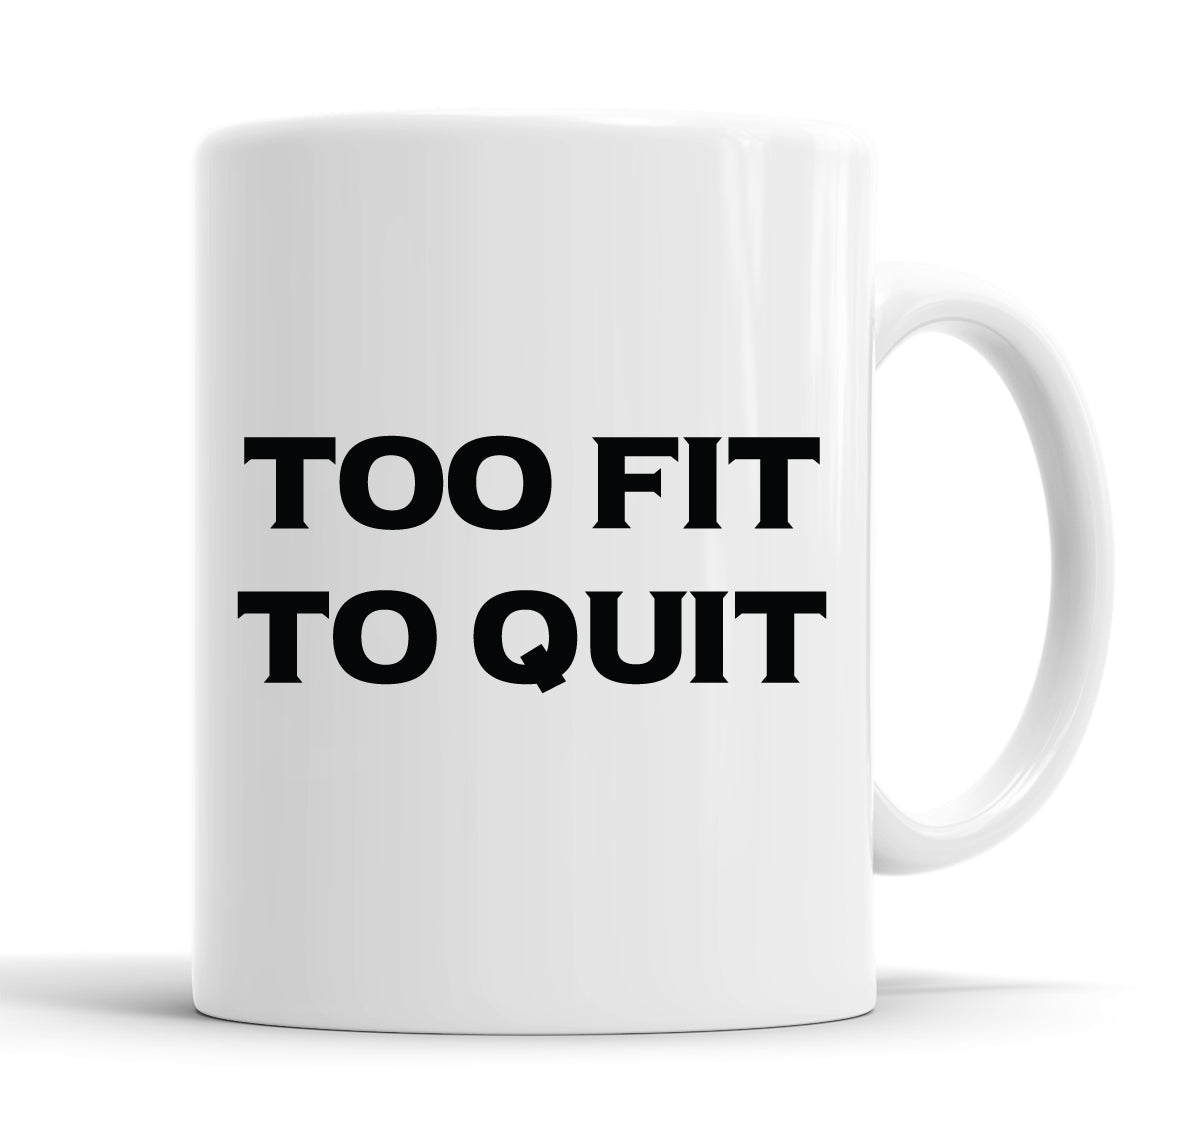 Too Fit To Quit Funny Slogan Mug Tea Cup Coffee